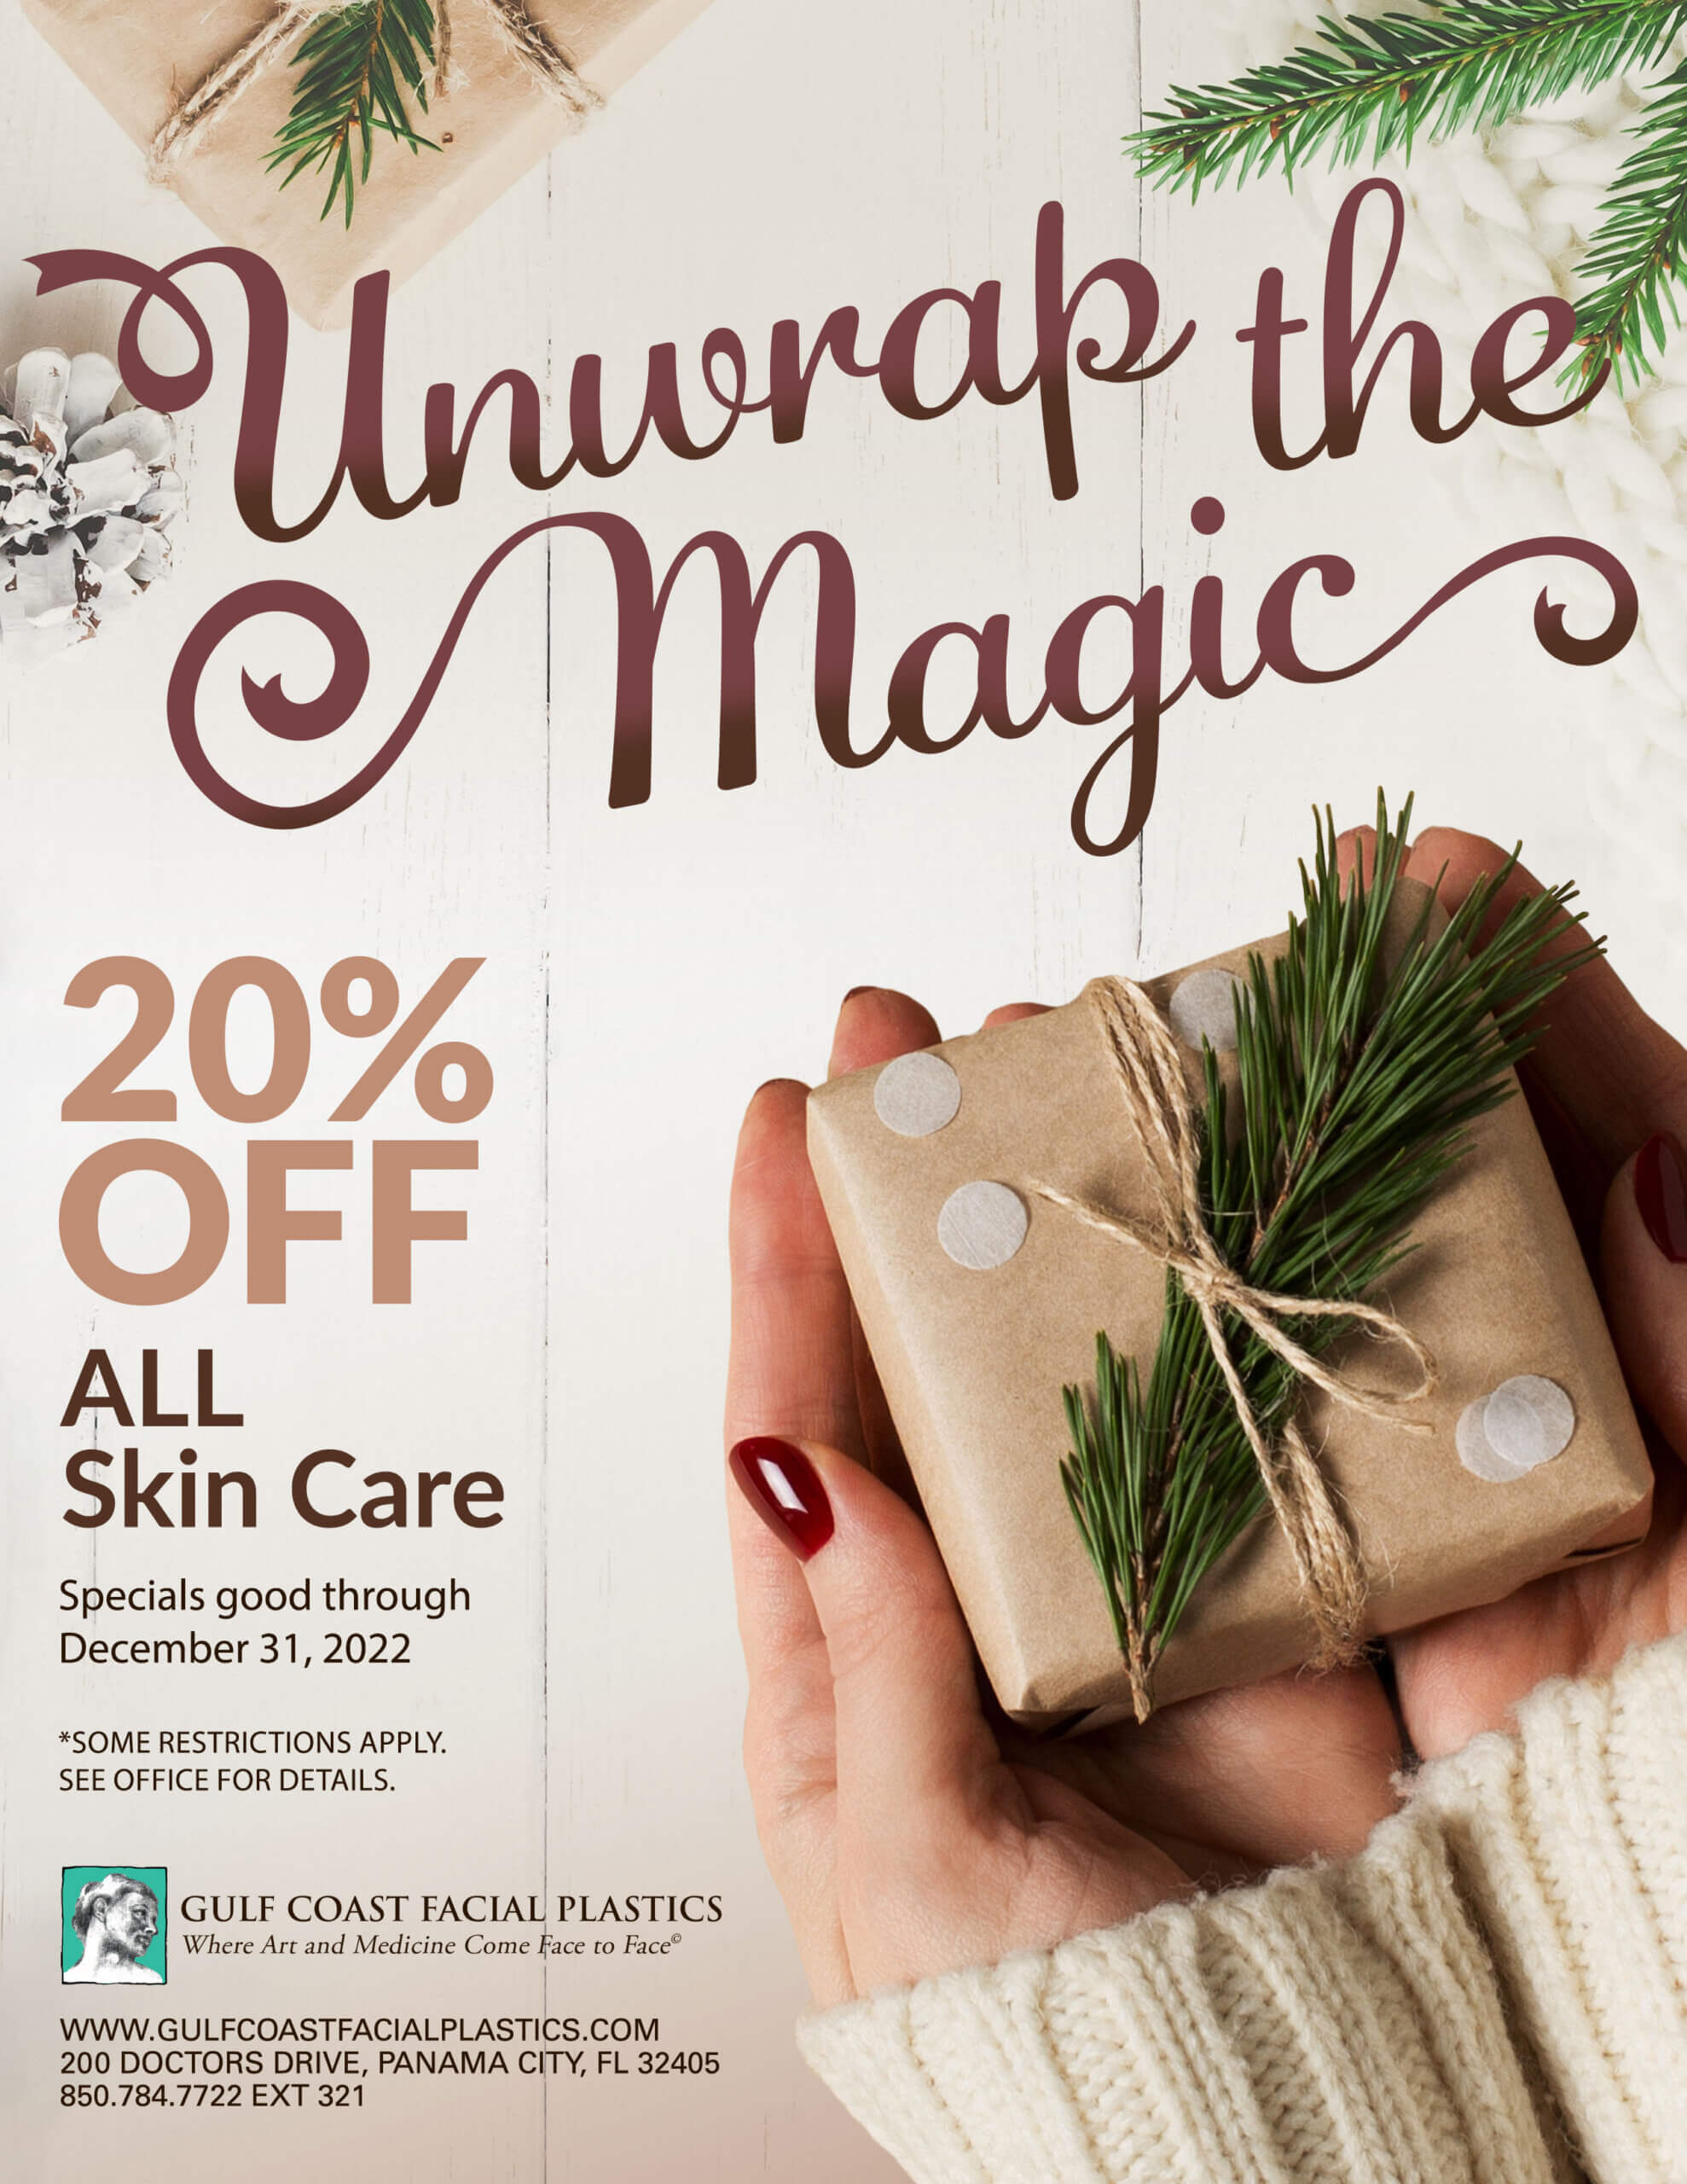 Unwrap the magic with 20% OFF All Skin Care through the month of December.